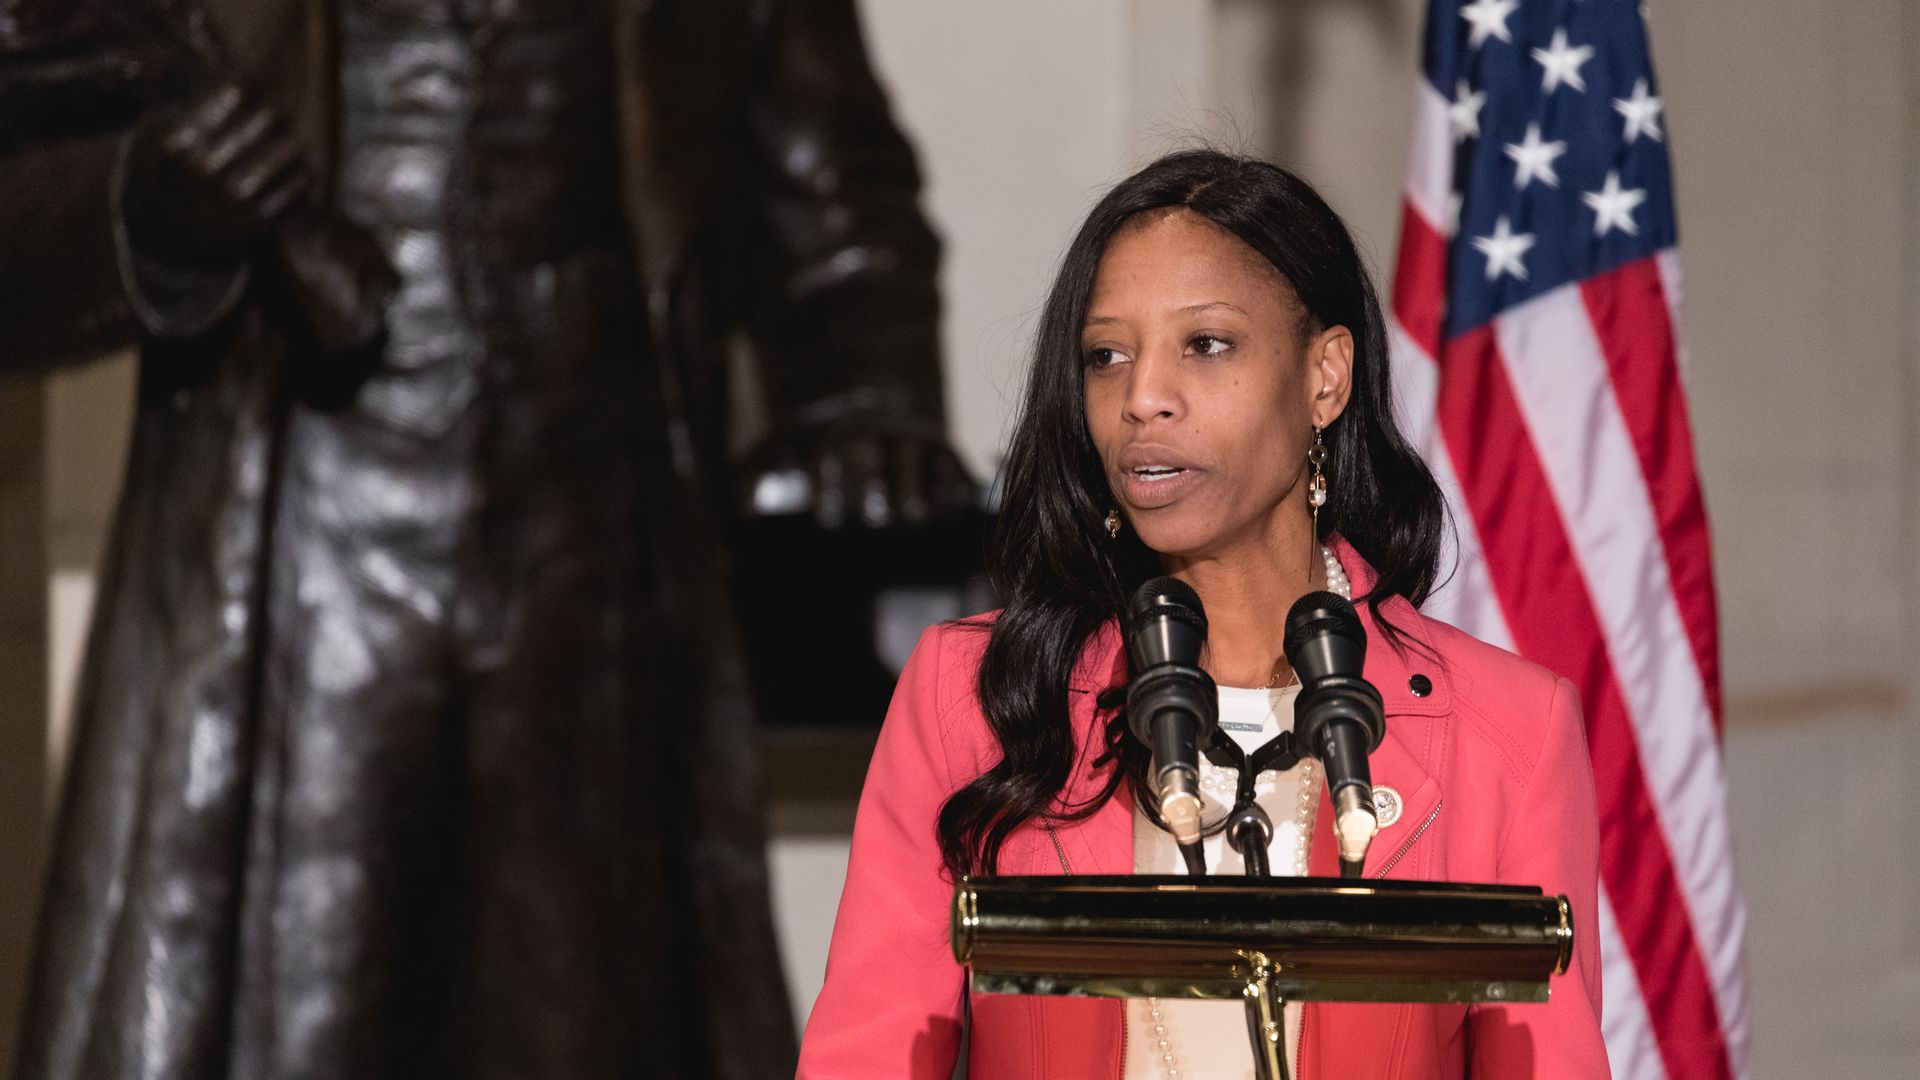 Mia Love before an American flag at a podium speaks.